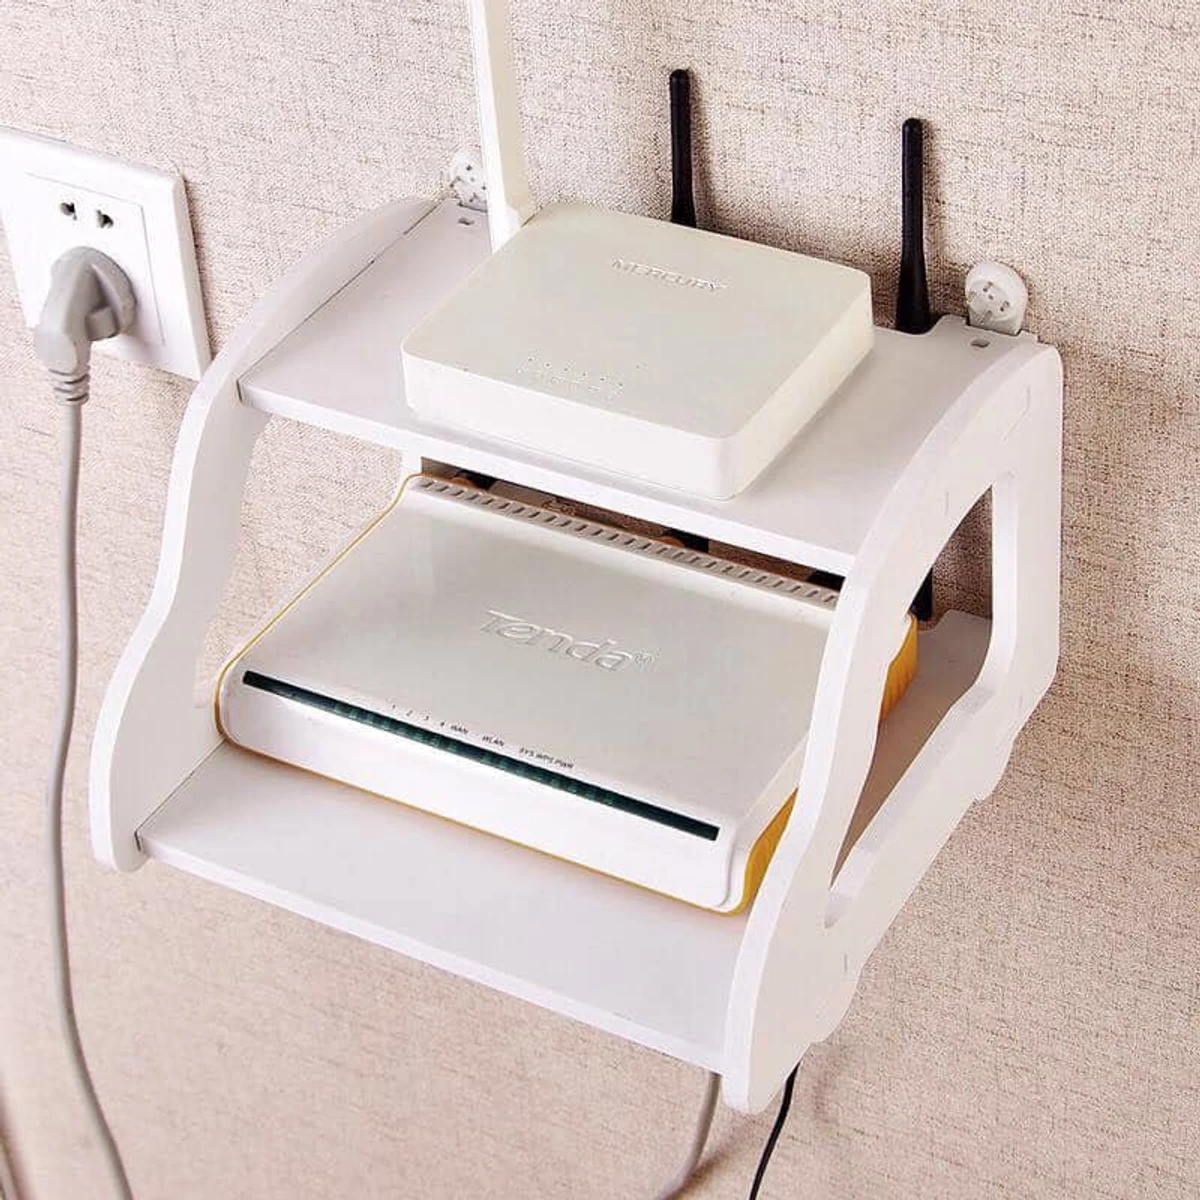 Wifi Router Stand - Storage Rack Display Holder Double Layer Floating Wall Mount Shelf Wood Desk Set